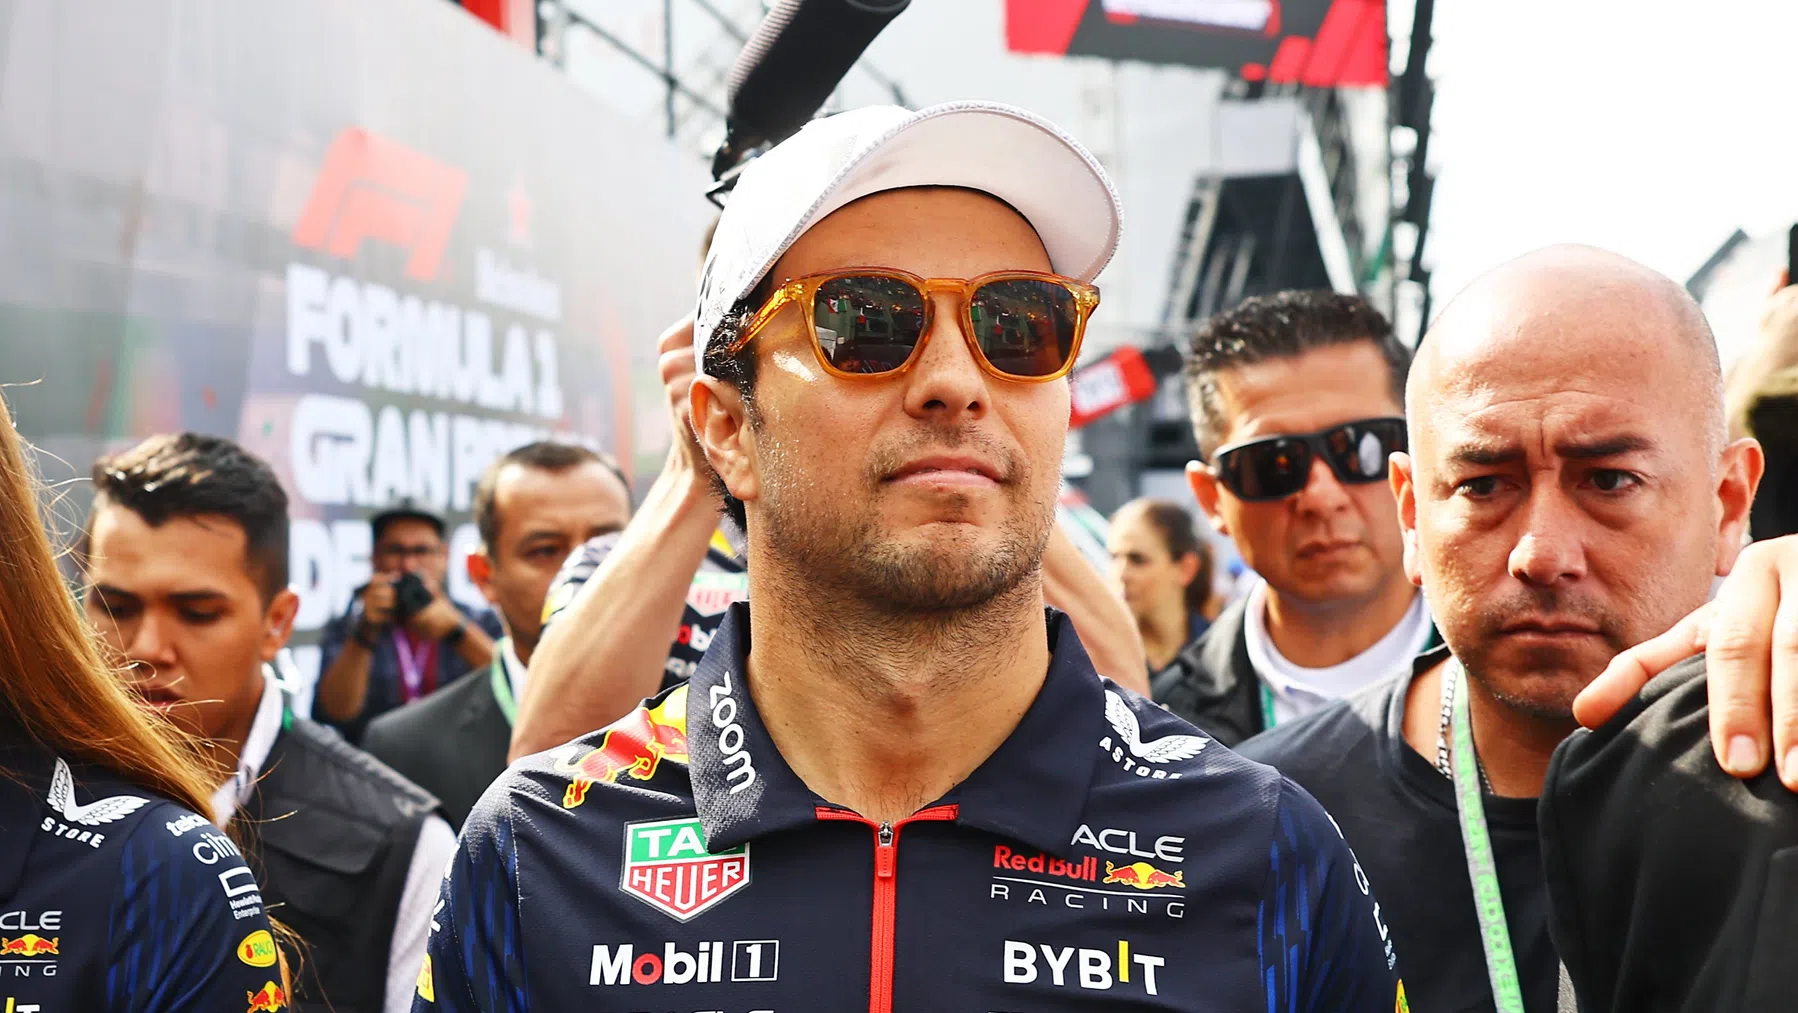 alpha romeo on possible arrival of perez from red bull racing